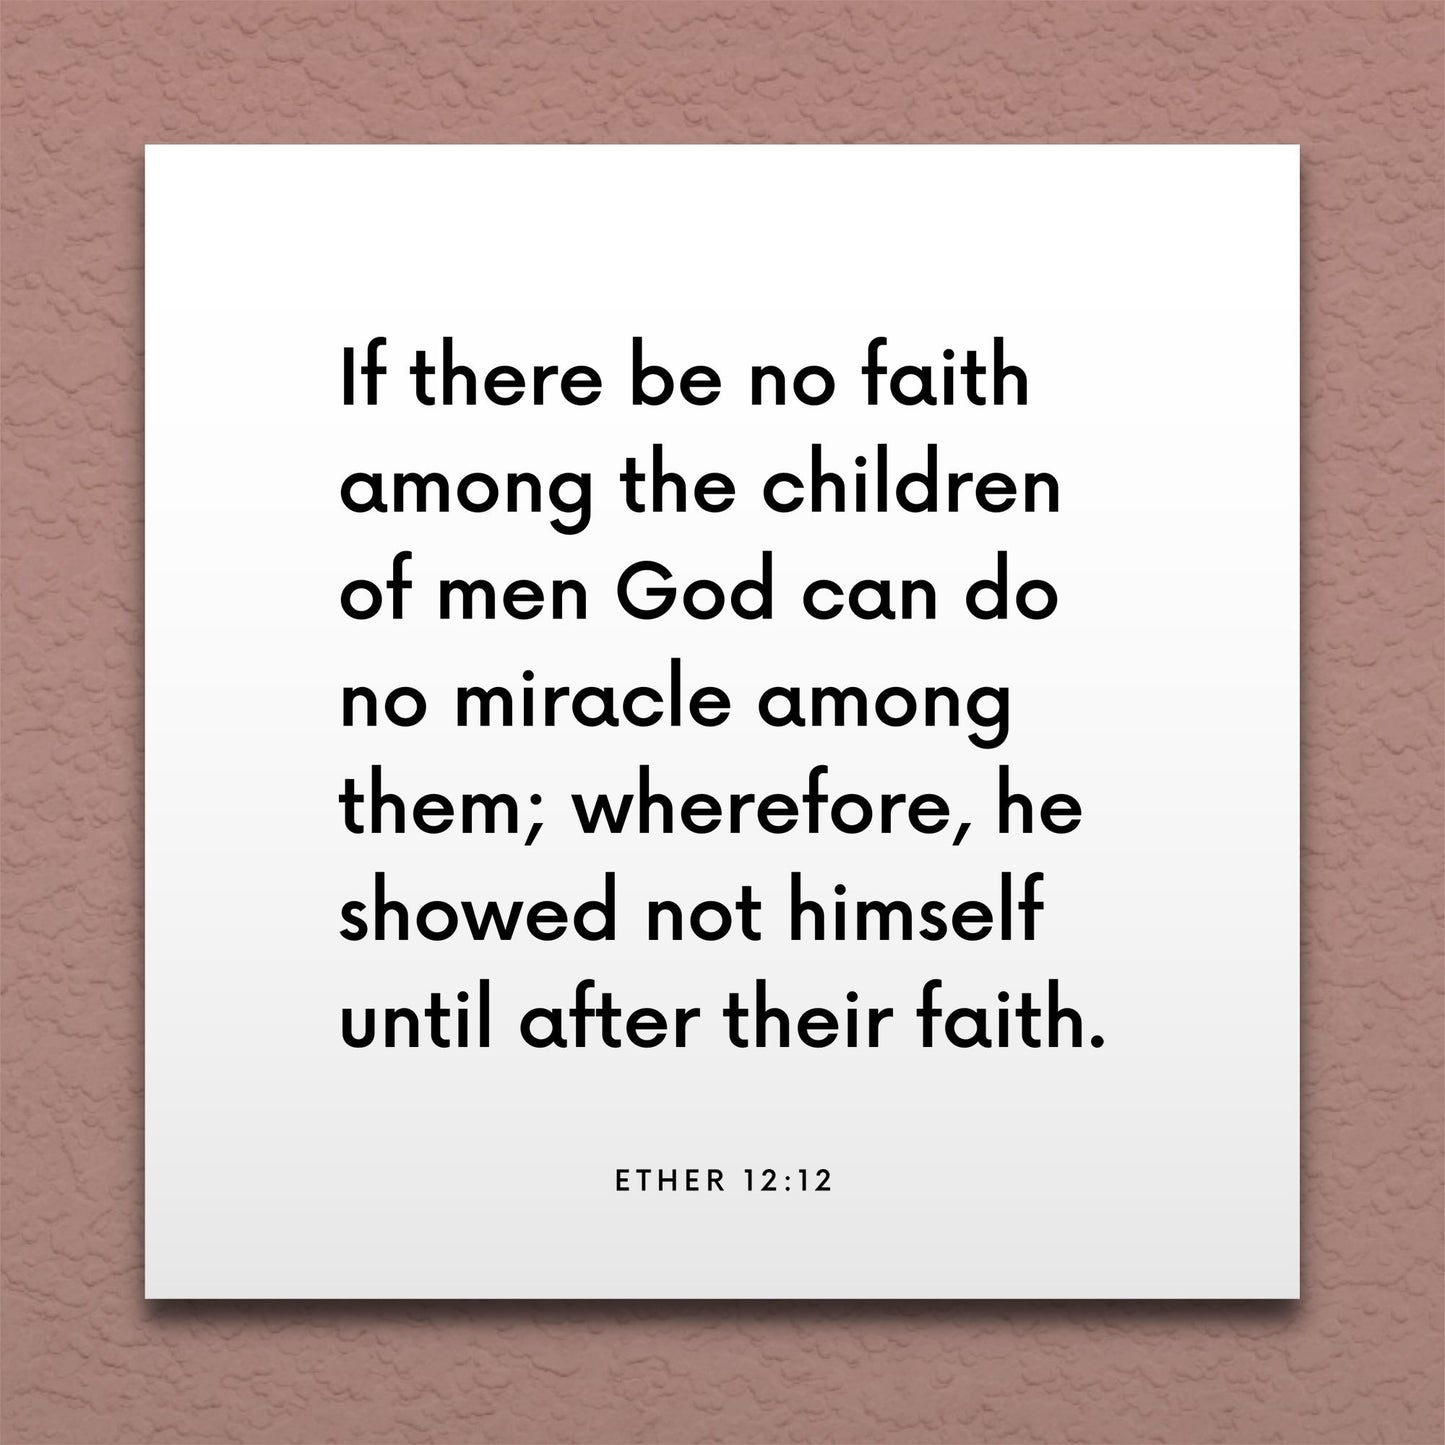 Wall-mounted scripture tile for Ether 12:12 - "If there be no faith, God can do no miracle"